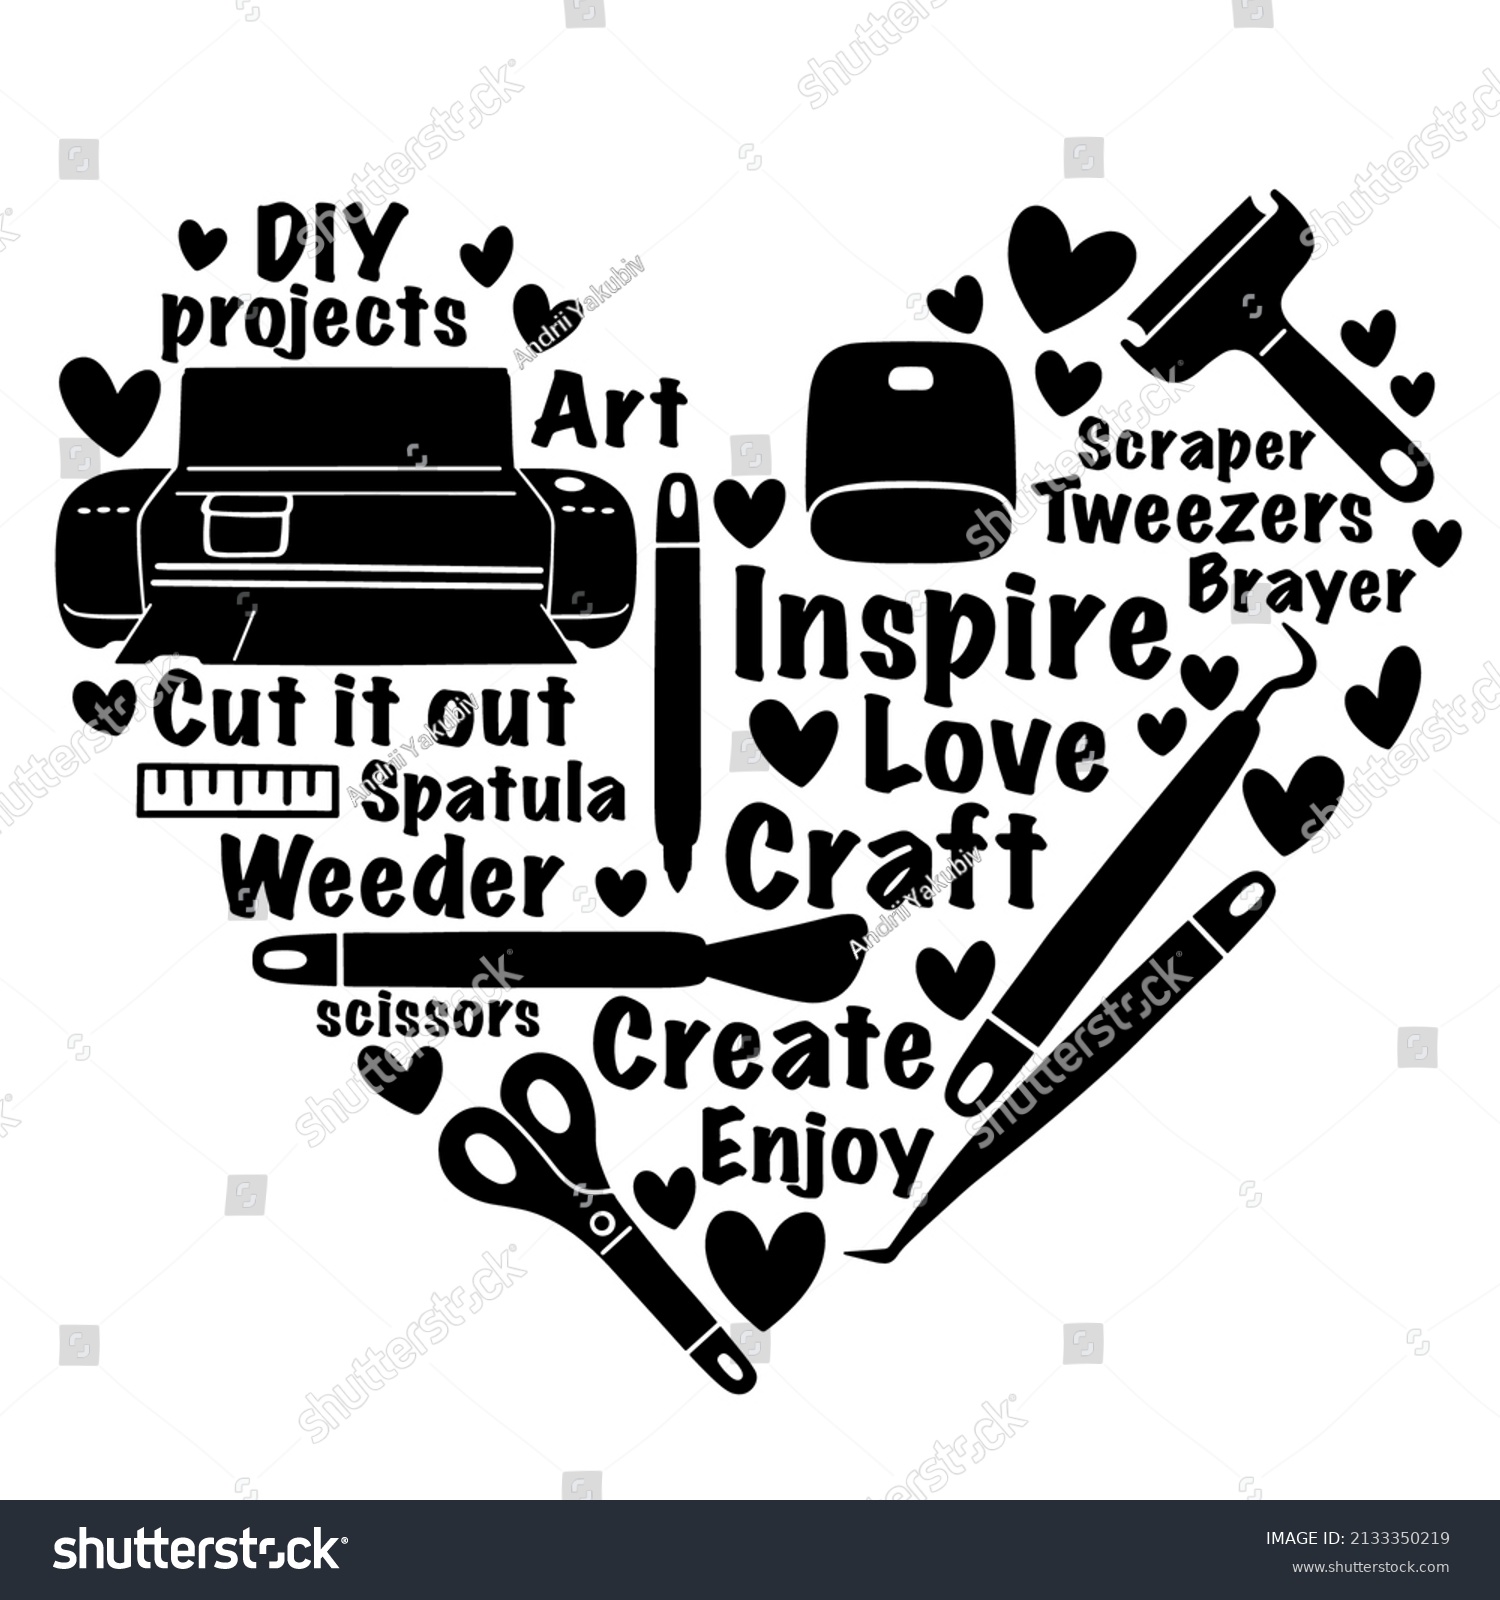 SVG of Love Crafting heart vector quotes illustration, DIY Craft tools craft room saying decor, gift for craft lovers, Hobby creation supplies SVG silhouette svg